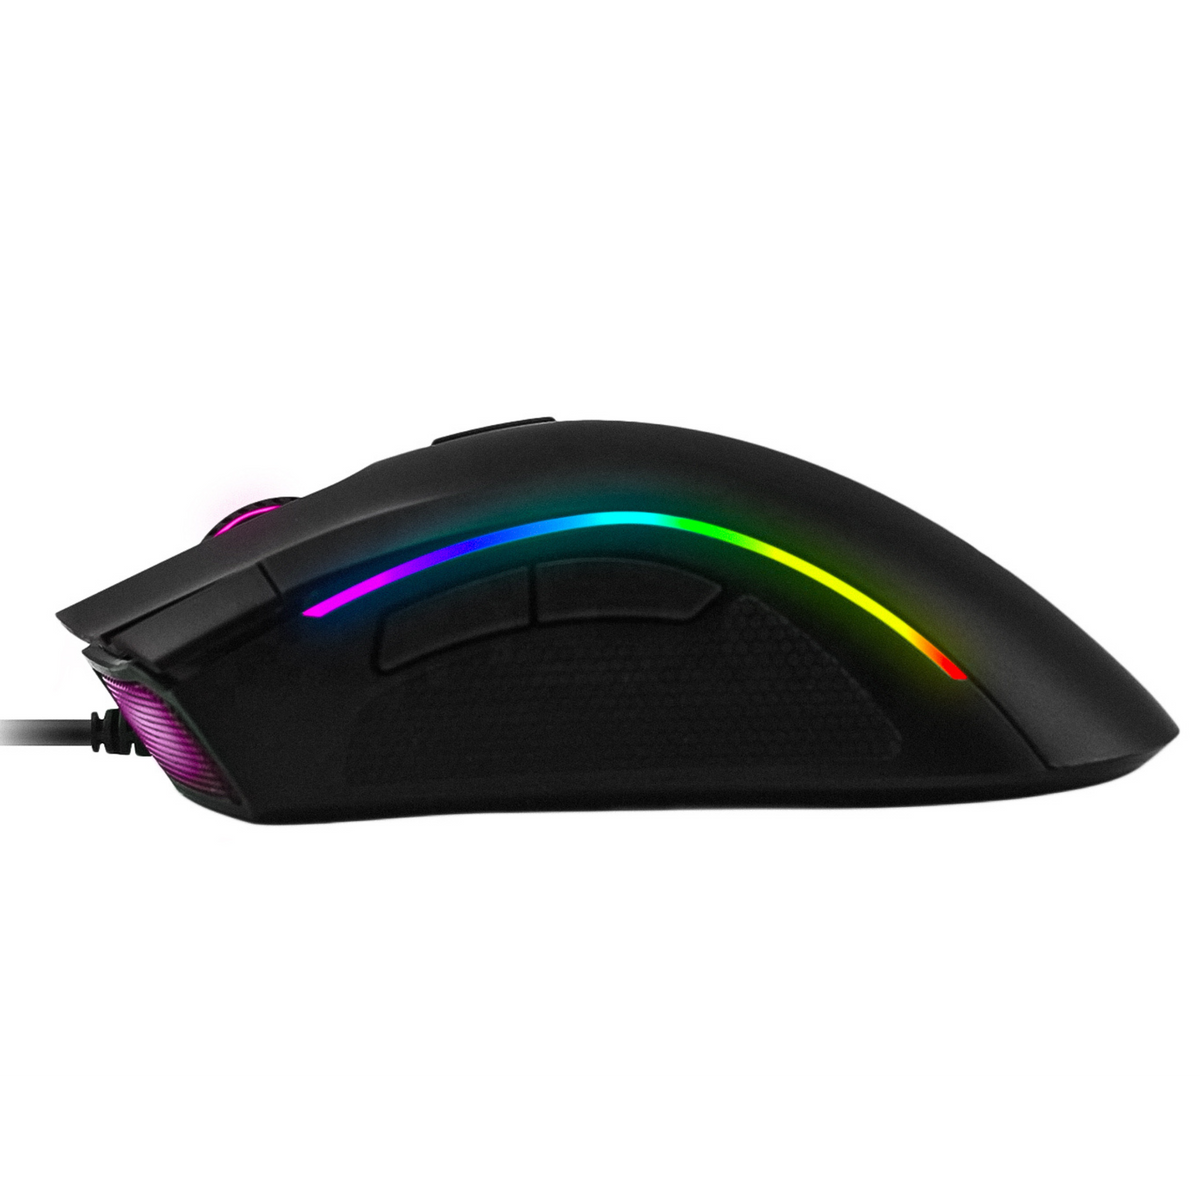 The Mysterious Gamer 24000 DPI Gaming Mouse 3360 Pixart